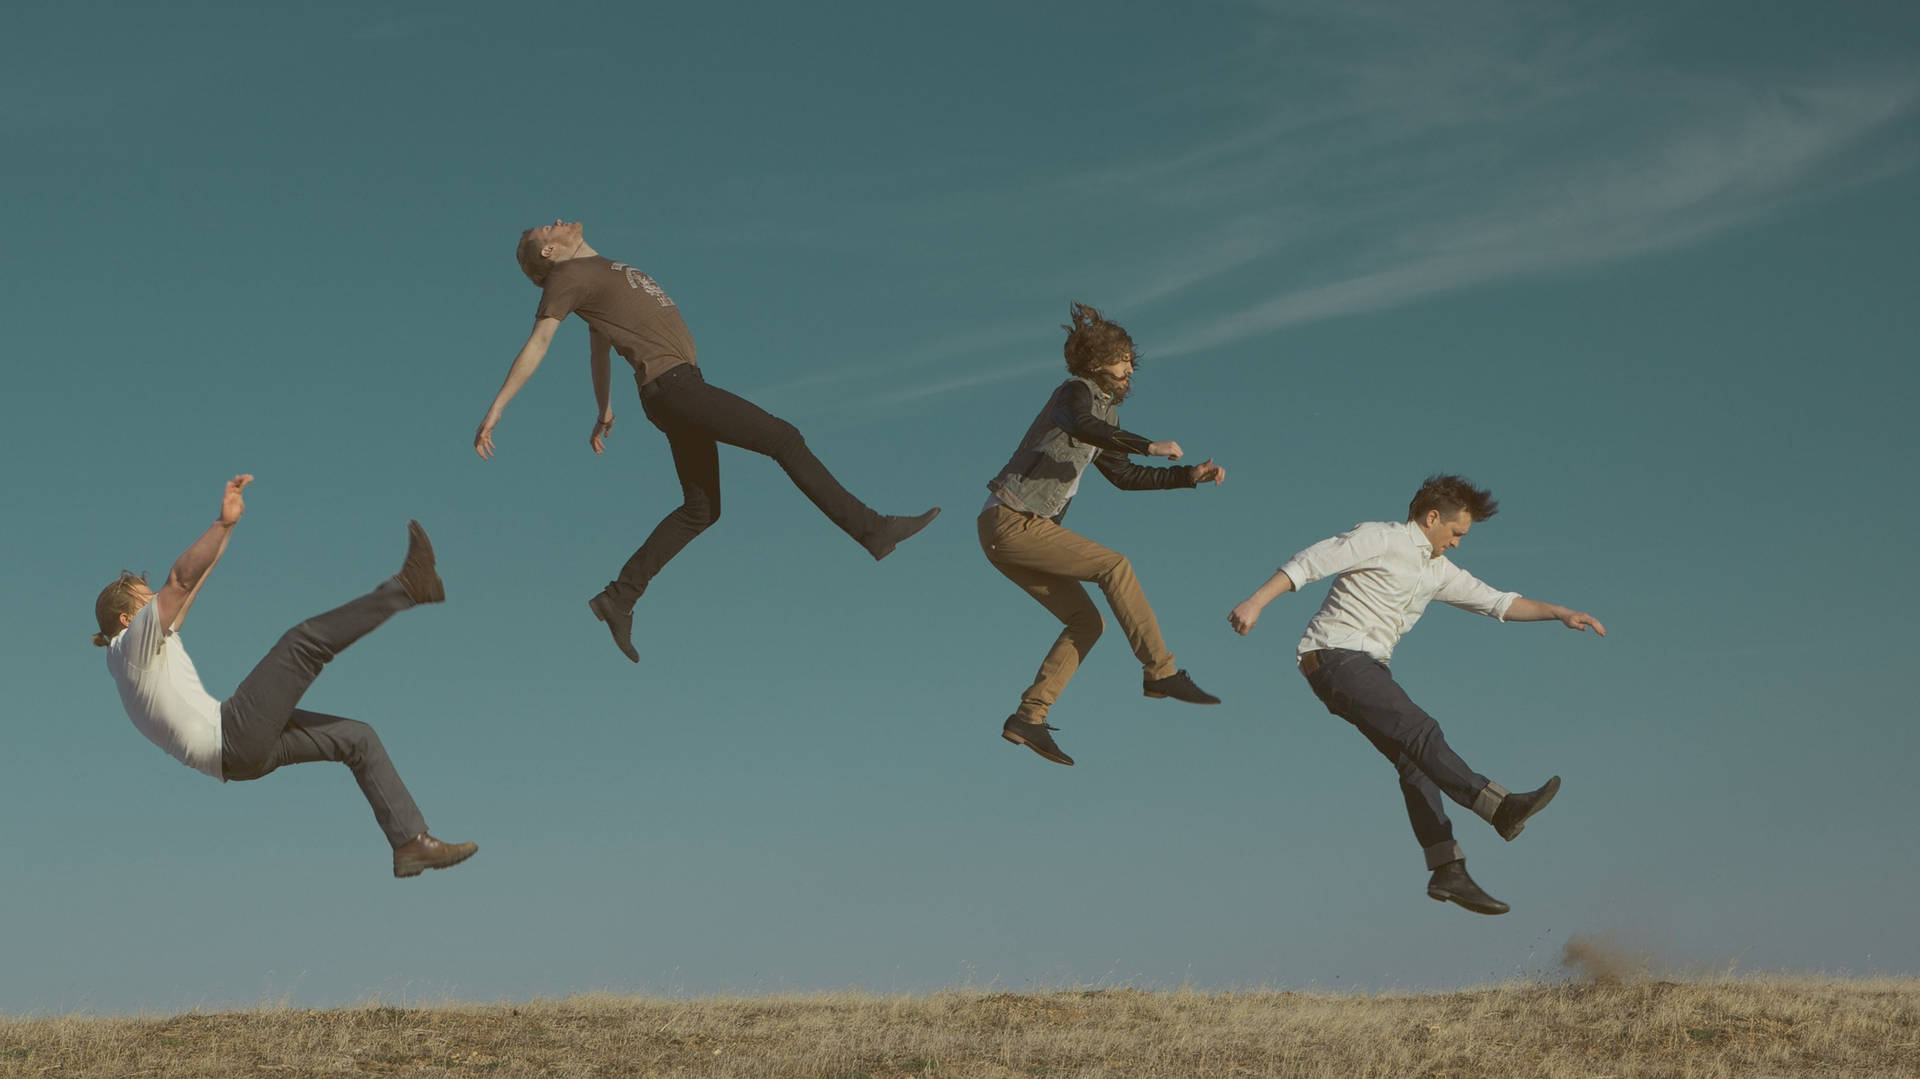 A Group Of People Jumping In The Air Wallpaper